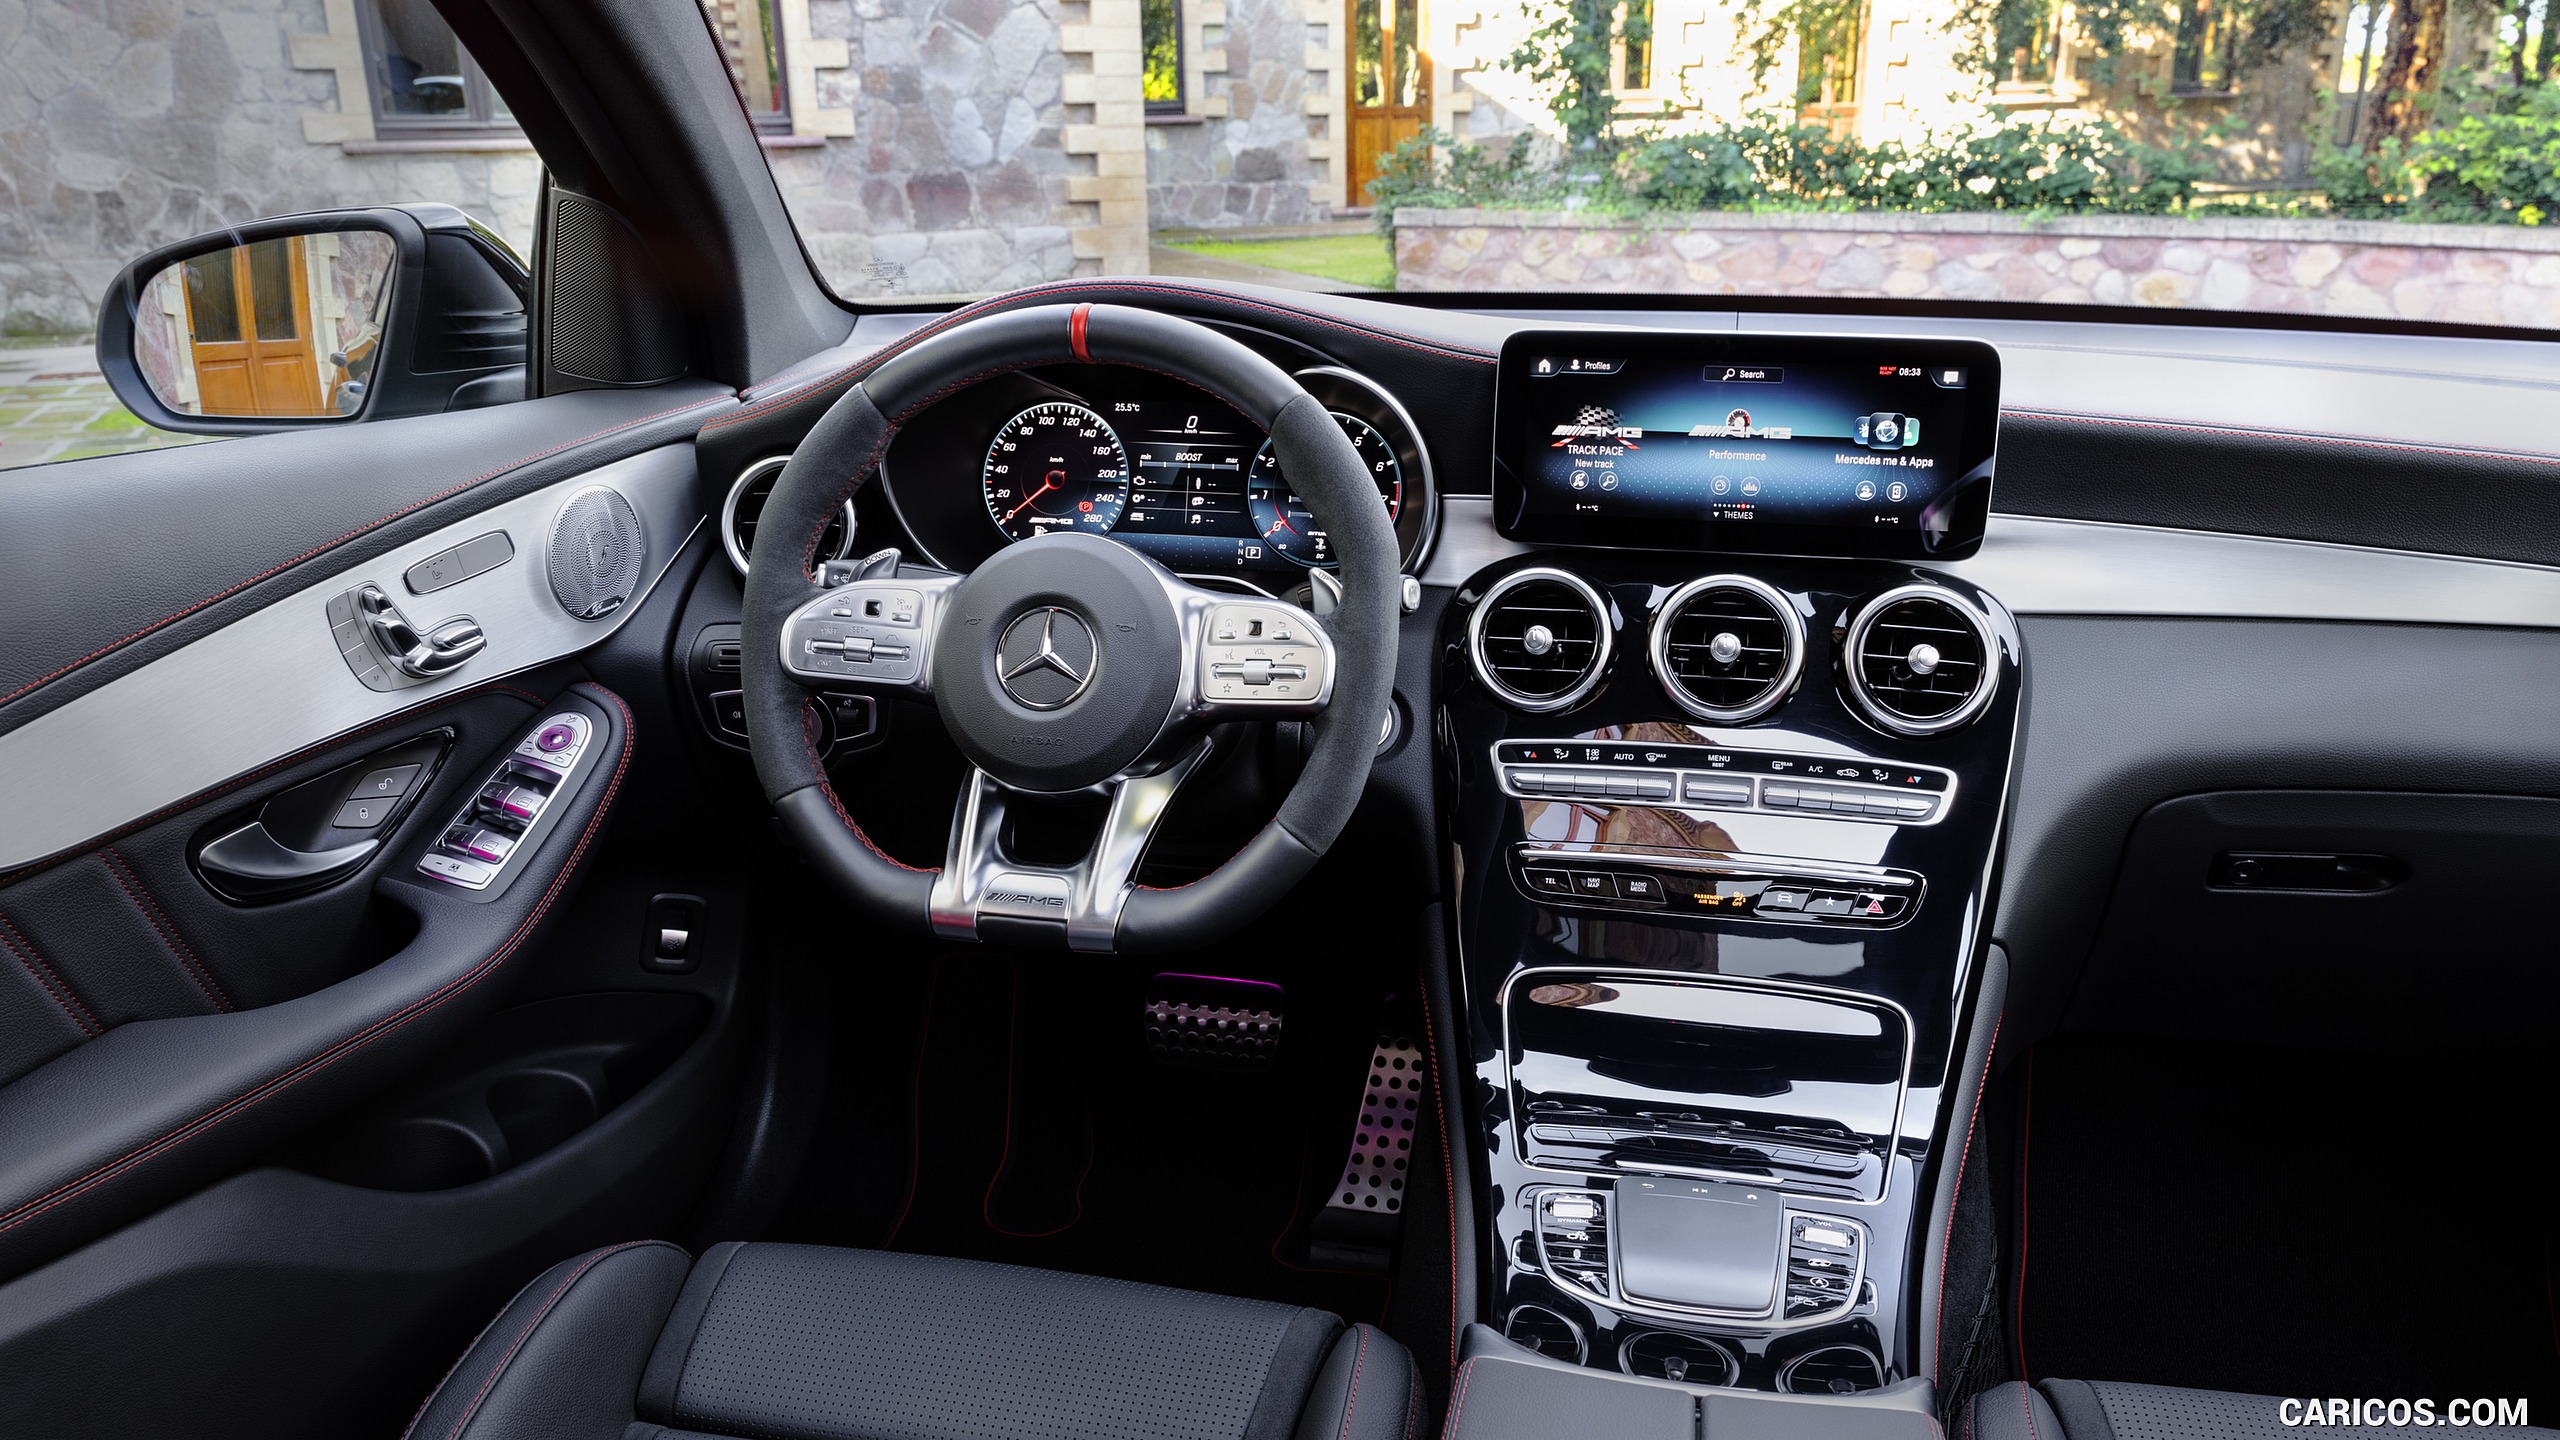 2020 Mercedes-AMG GLC 43 4MATIC Coupe - Interior, Cockpit, #27 of 173